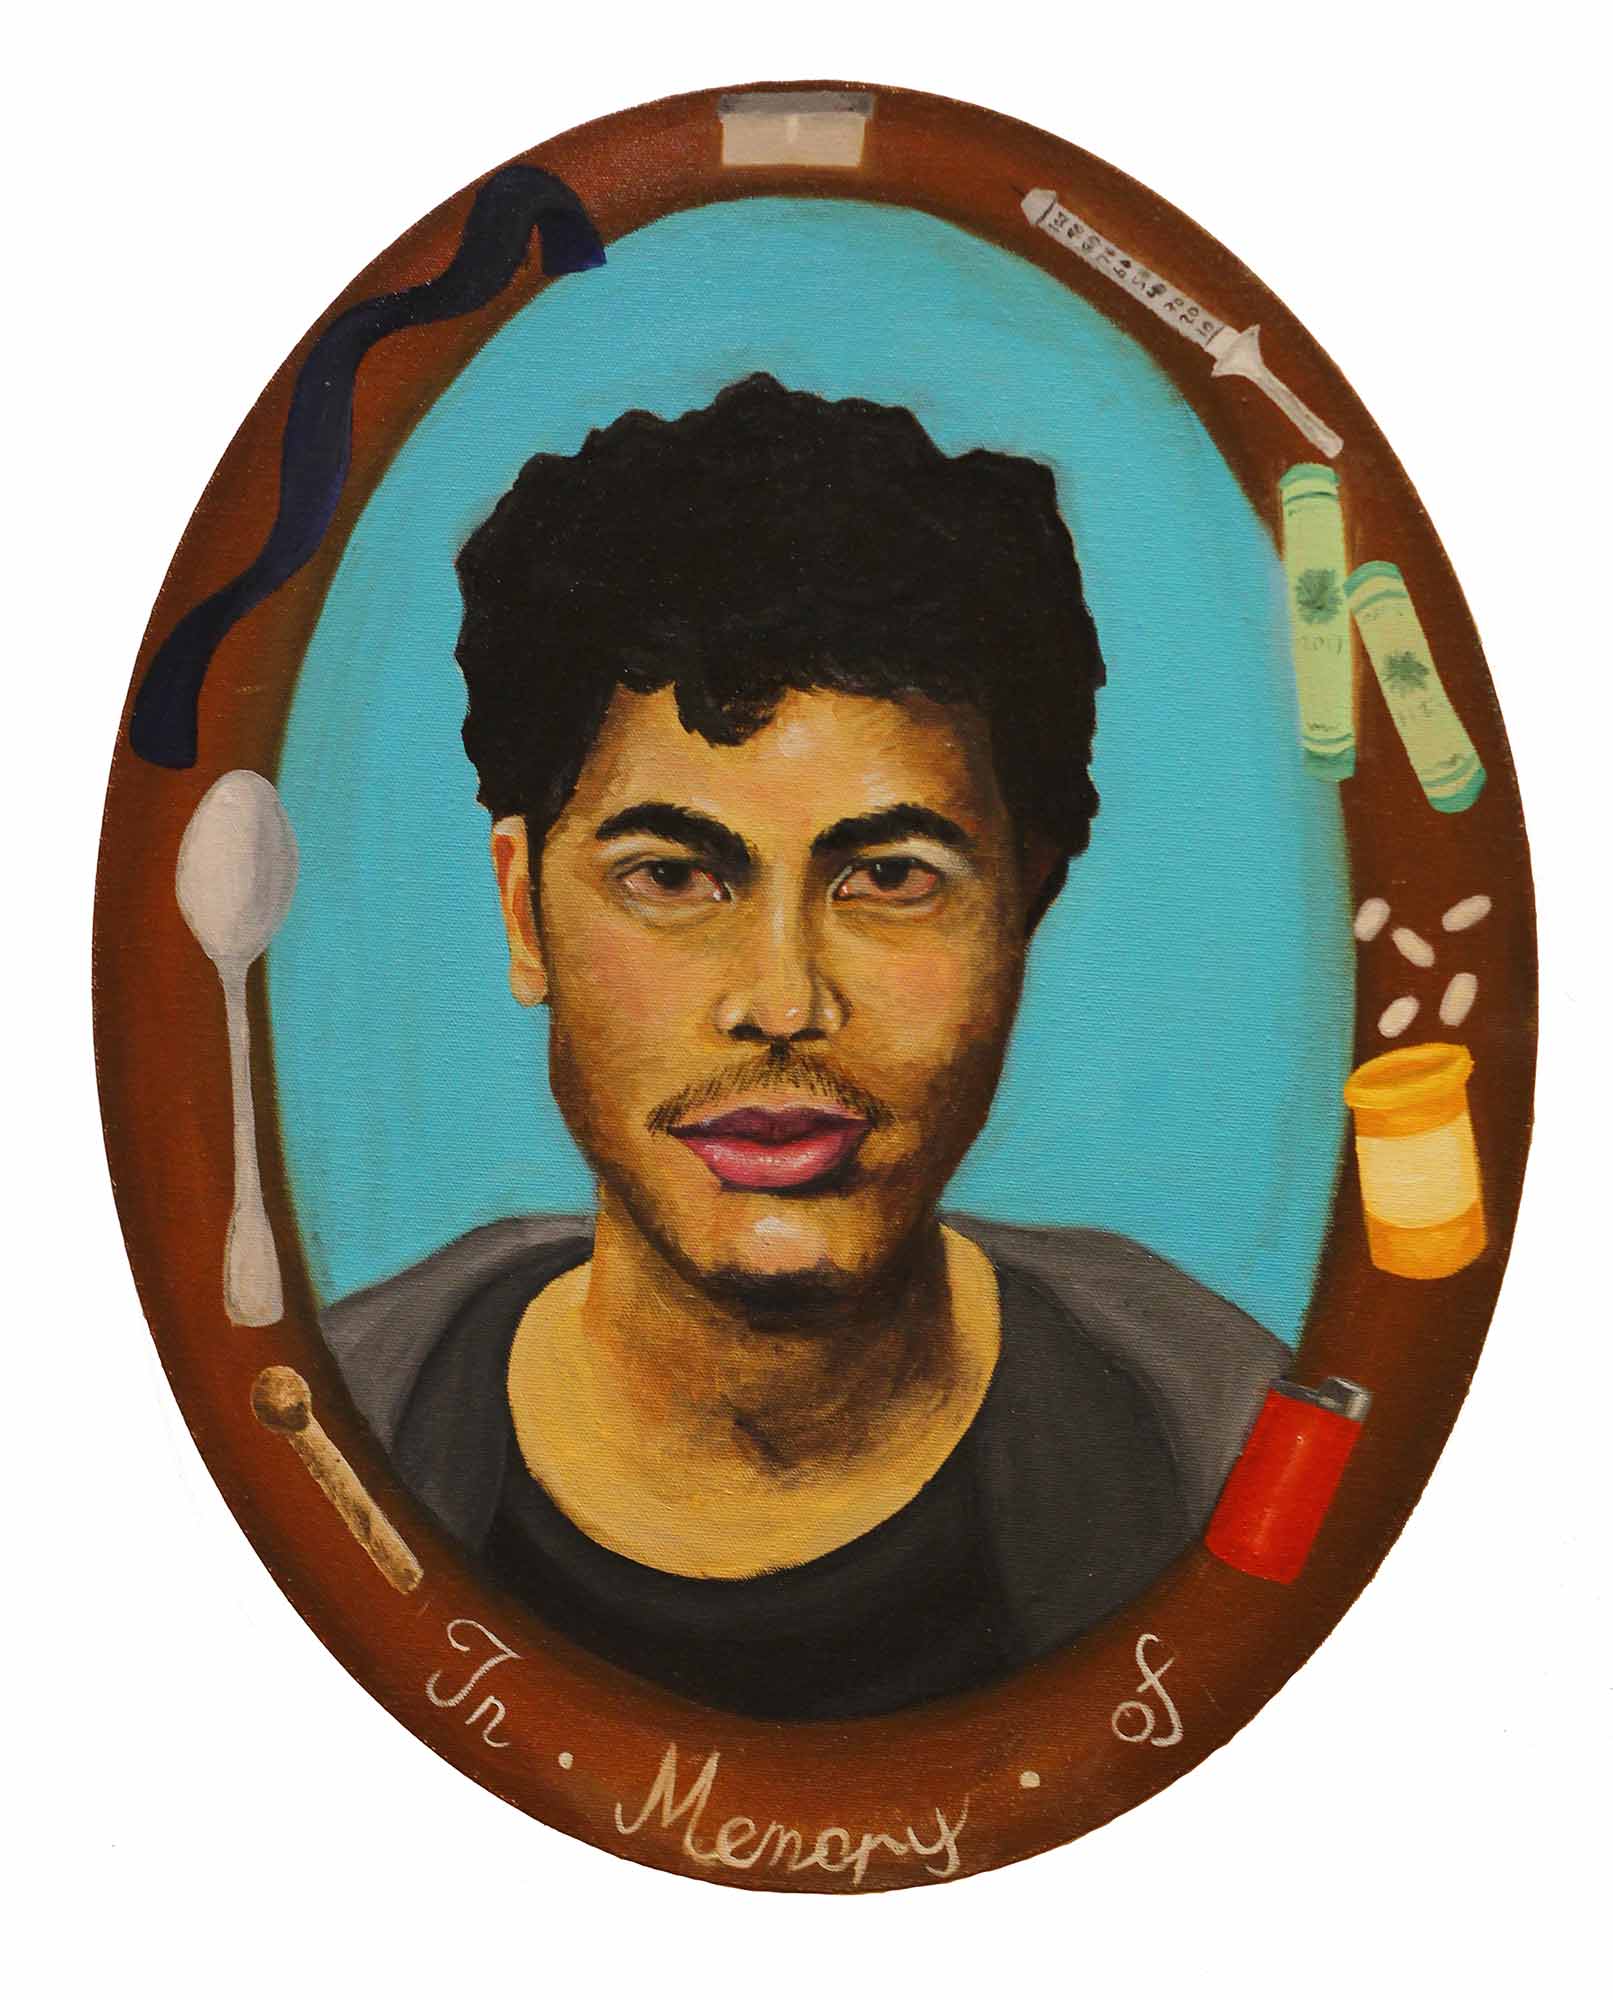 An oval shaped painting of a man surrounded by drug paraphernalia with the text "In Memory of"